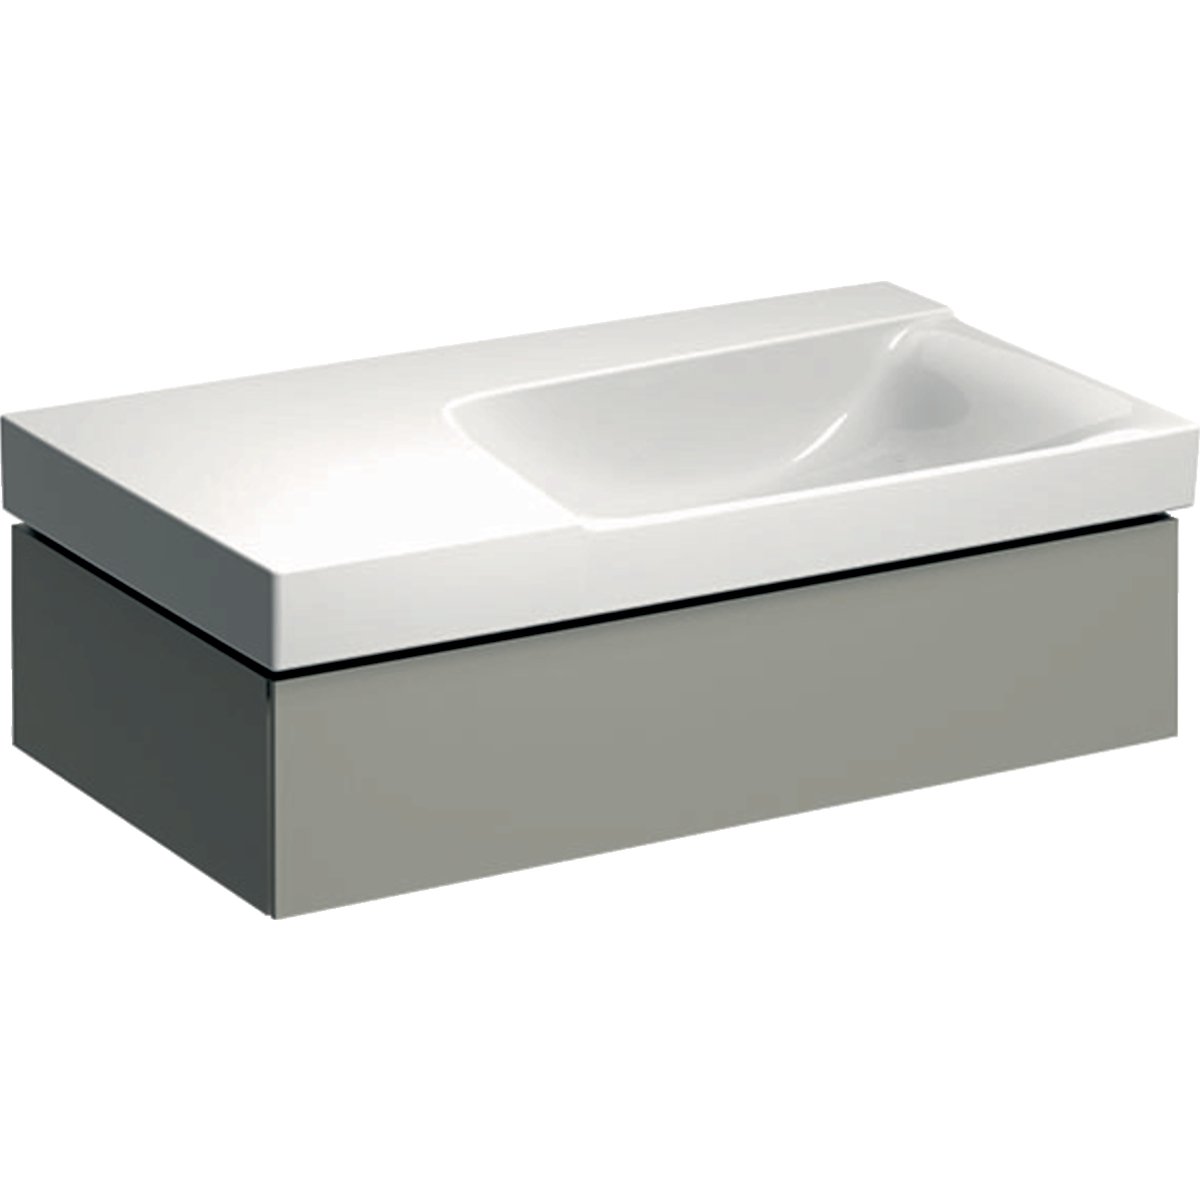 Geberit 500514001 Xeno2 900mm Asymmetrical Vanity Unit with Left Shelf & One Drawer - Grey (Basin not included)